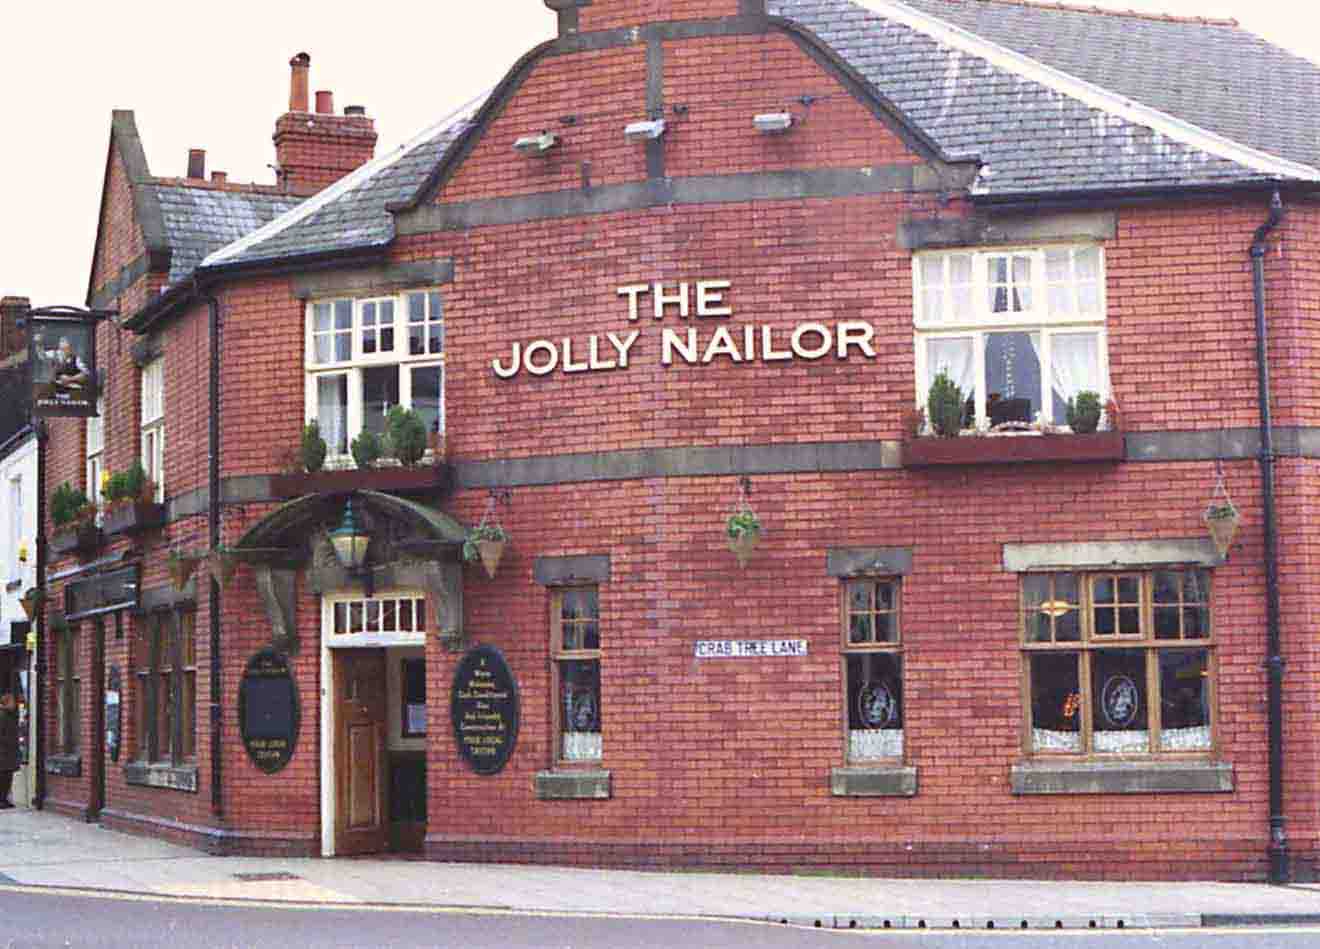 The Jolly Nailor, a last reminder of Atherton's nail trade. The modern inn sign shows a cobbler banging home a boot nail, no doubt a Chowbent sparrowbill. Photo by Peter Wood, 22 Dec 2003